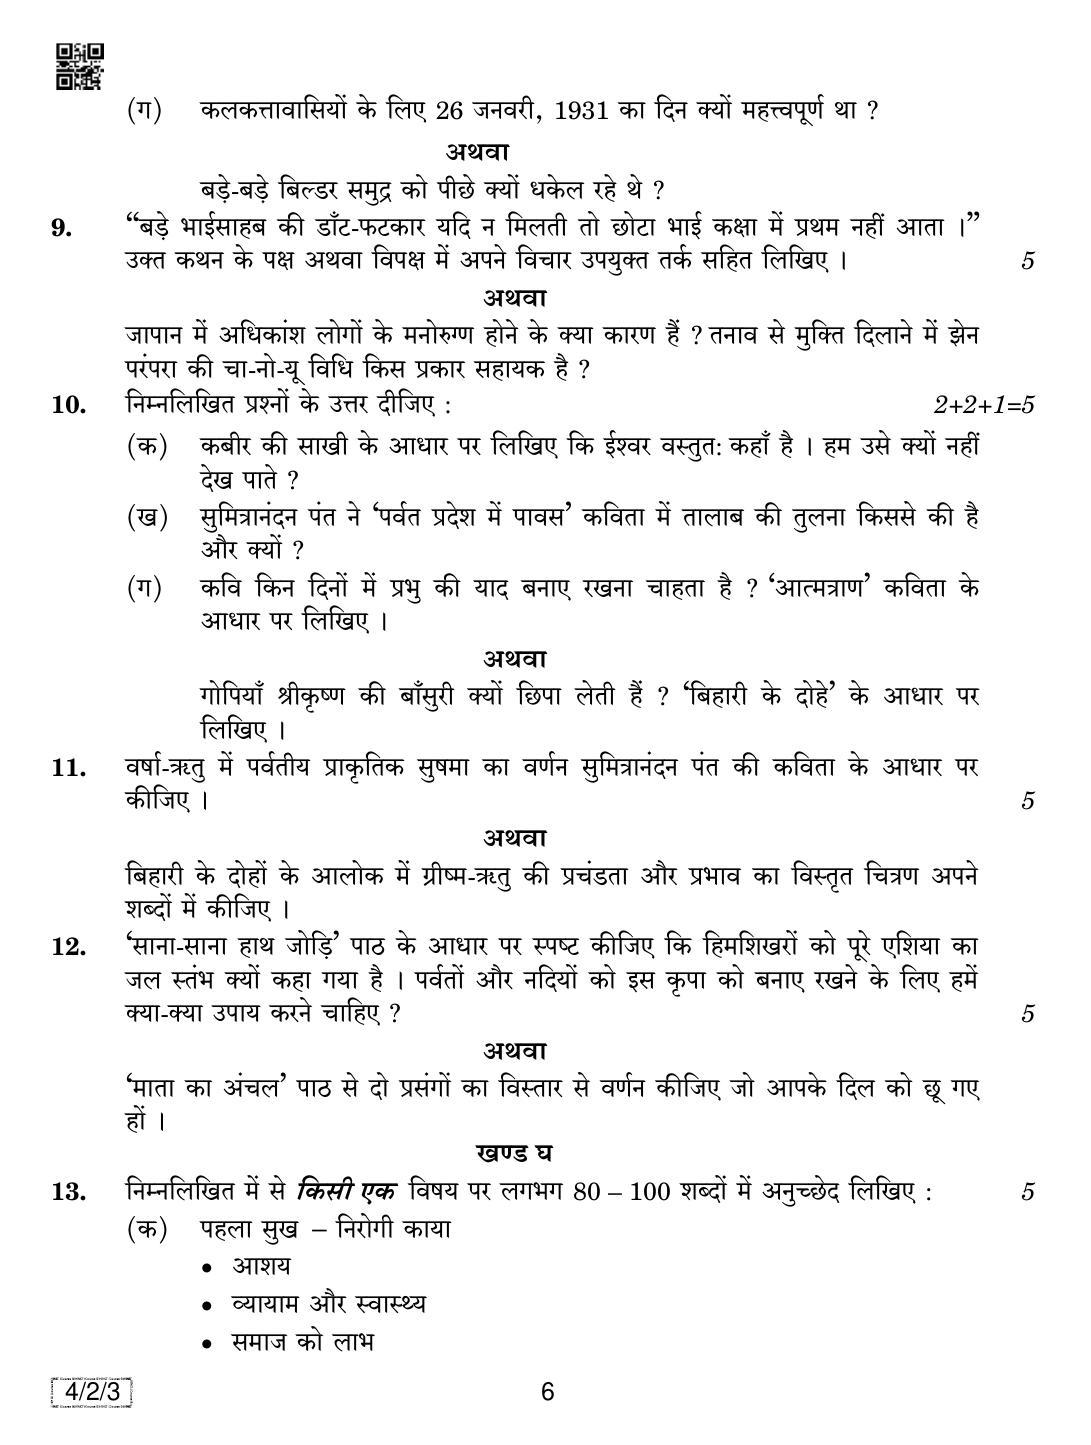 CBSE Class 10 4-2-3 HINDI COURSE- B 2019 Question Paper - Page 6